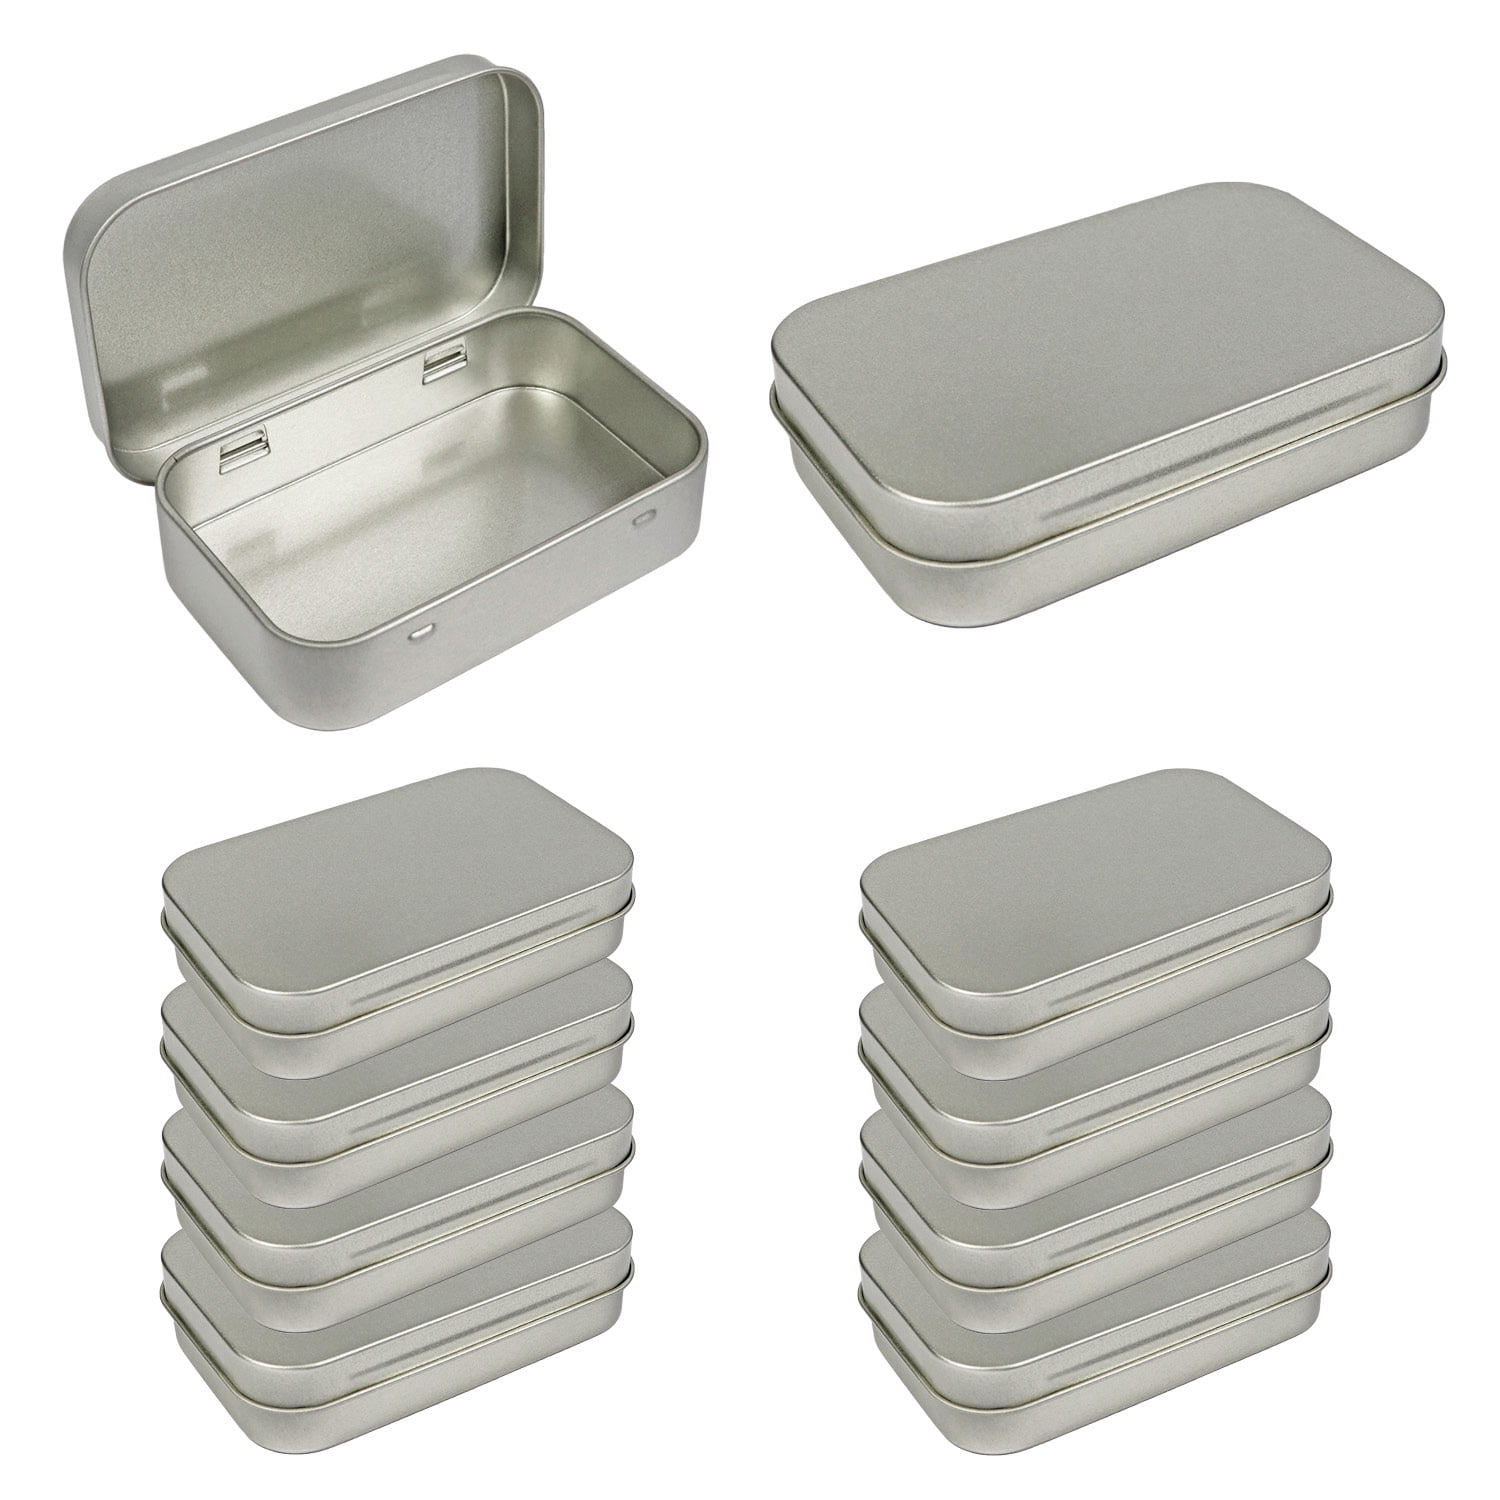 Hotop 8.5 by 5.3 by 1.9 Inch Silver Rectangular Empty Tin Box Containers,  Gift, Jewelery and Storage Tin Kit, Home Organizer